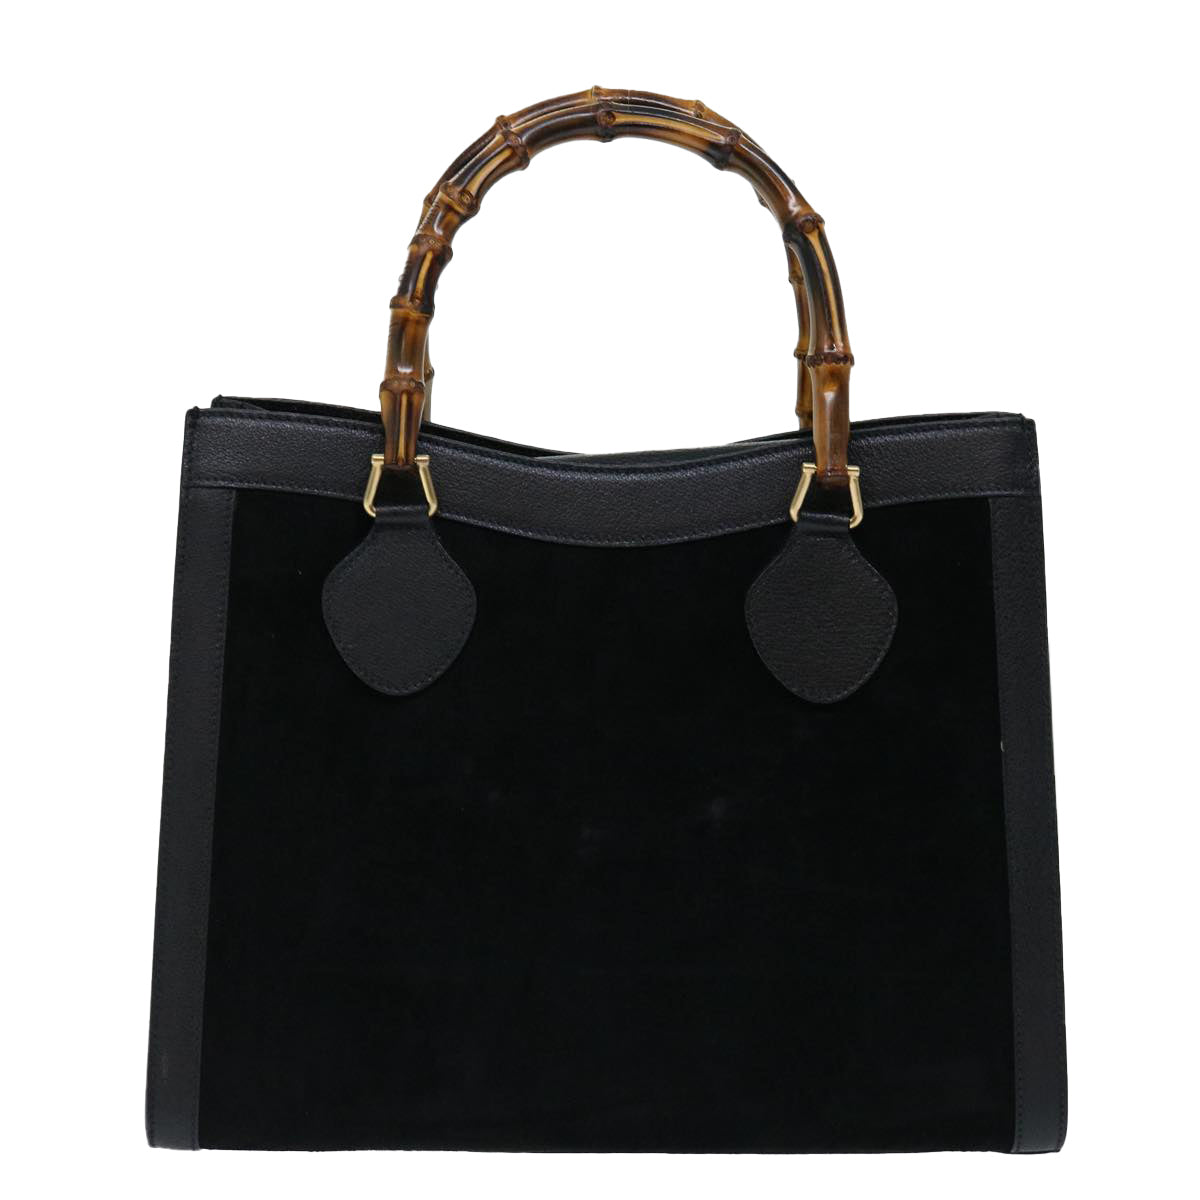 GUCCI Bamboo Tote Bag Suede Black 002 0260 2615 Auth 70189 - 0